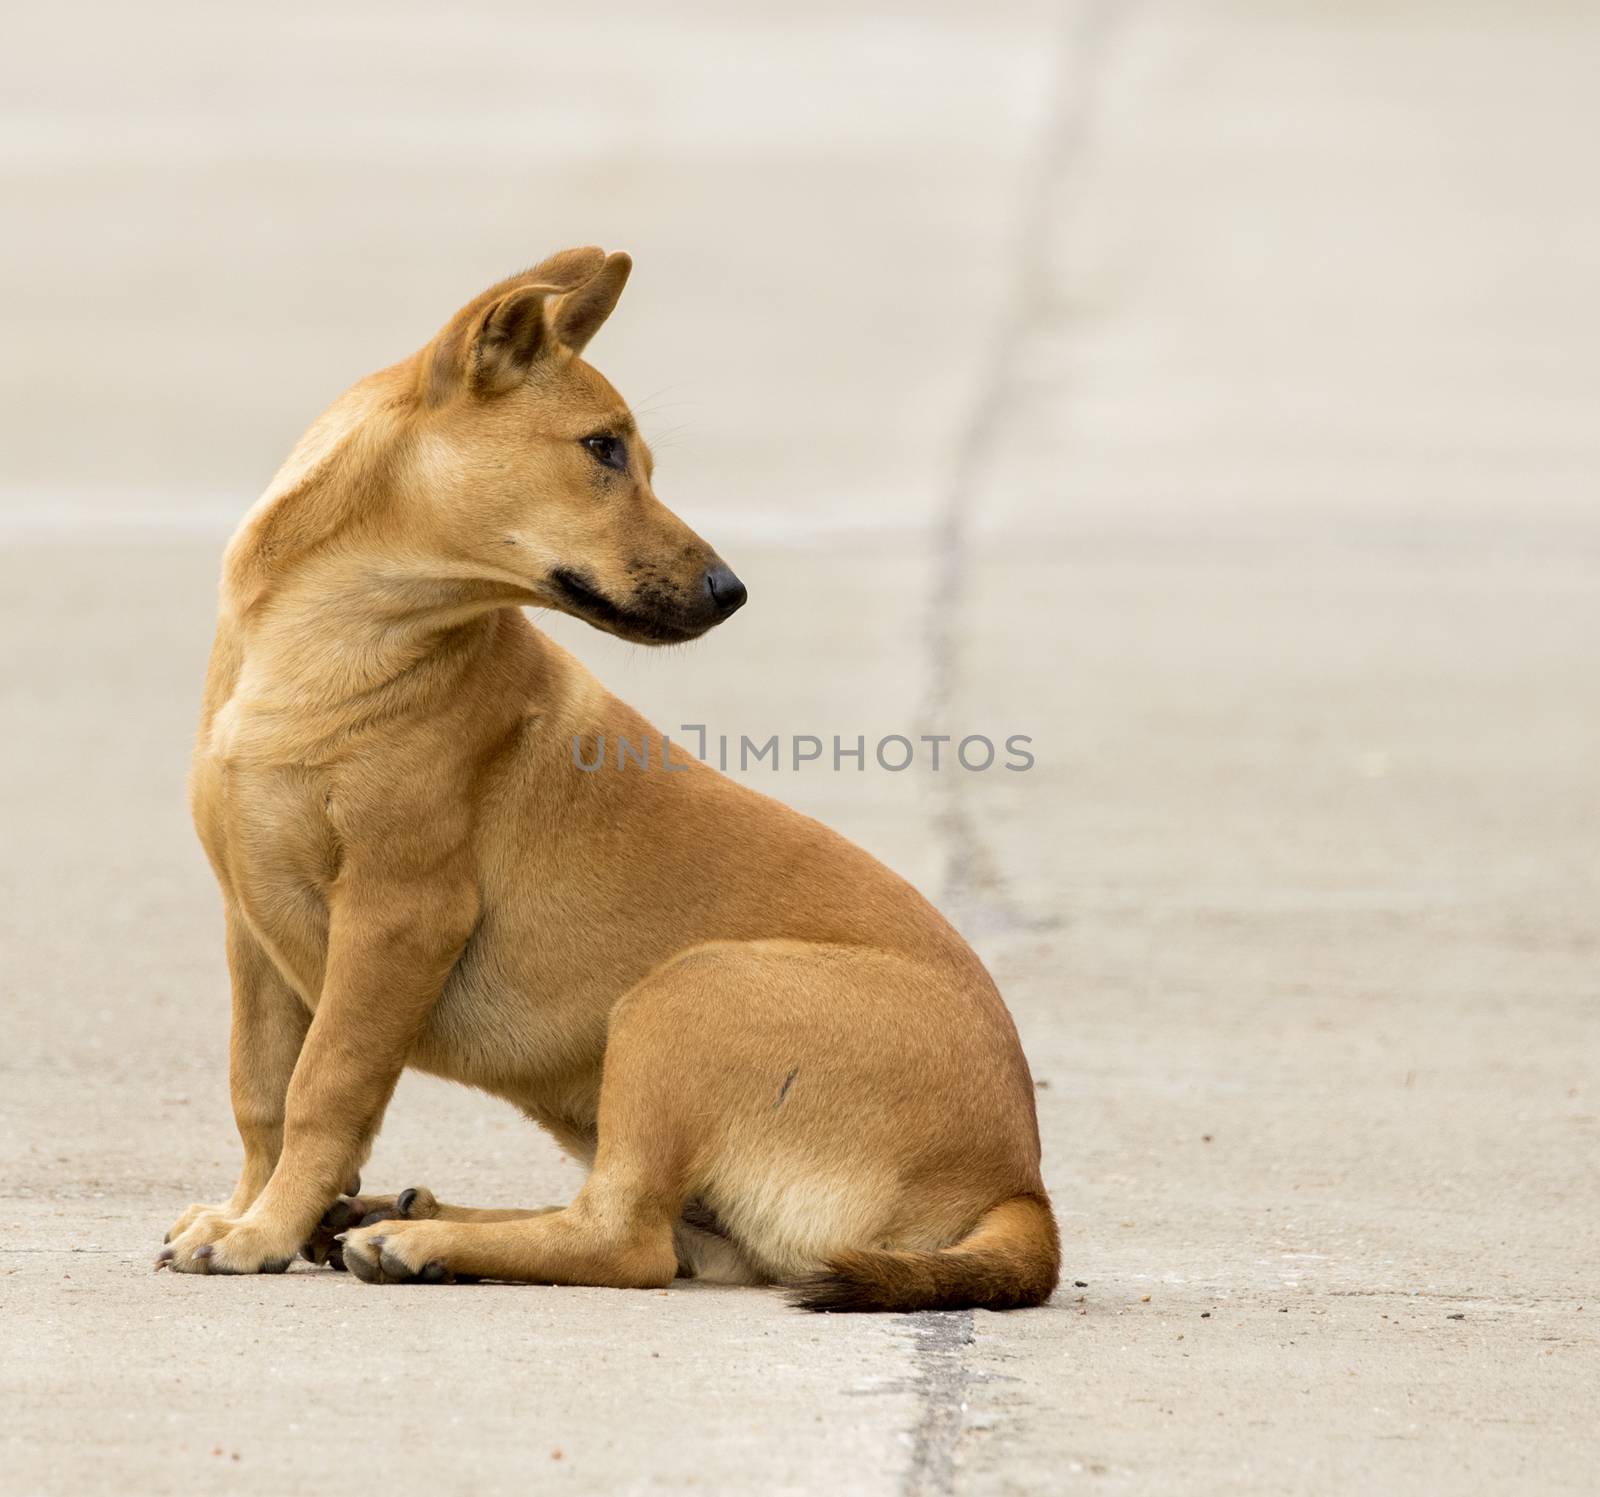 Image of a brown dog on street. by yod67